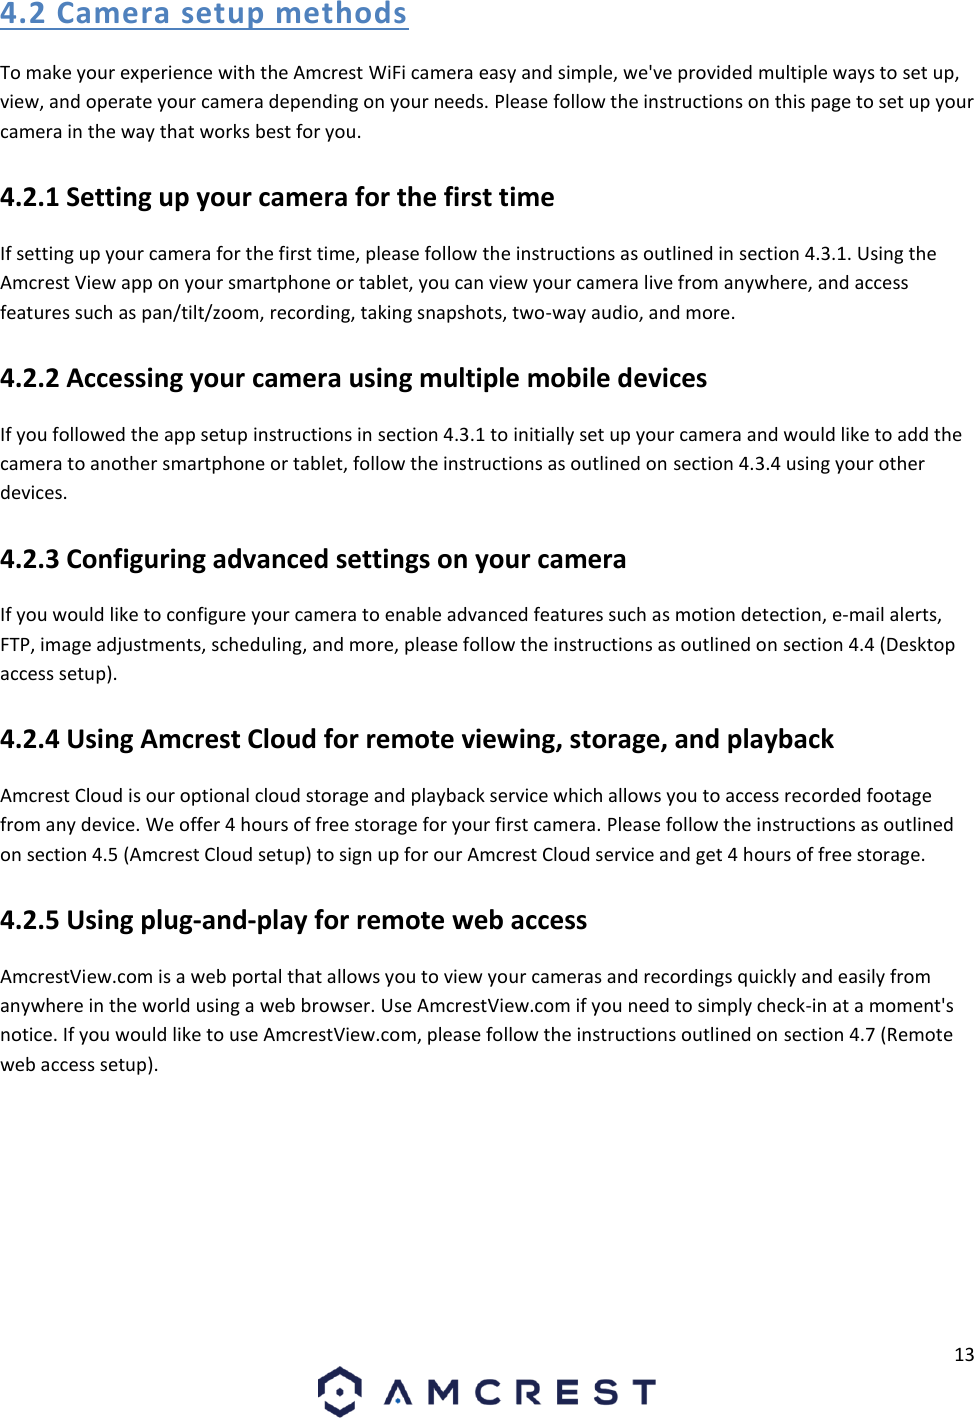 13  4.2 Camera setup methods To make your experience with the Amcrest WiFi camera easy and simple, we&apos;ve provided multiple ways to set up, view, and operate your camera depending on your needs. Please follow the instructions on this page to set up your camera in the way that works best for you. 4.2.1 Setting up your camera for the first time If setting up your camera for the first time, please follow the instructions as outlined in section 4.3.1. Using the Amcrest View app on your smartphone or tablet, you can view your camera live from anywhere, and access features such as pan/tilt/zoom, recording, taking snapshots, two-way audio, and more. 4.2.2 Accessing your camera using multiple mobile devices If you followed the app setup instructions in section 4.3.1 to initially set up your camera and would like to add the camera to another smartphone or tablet, follow the instructions as outlined on section 4.3.4 using your other devices. 4.2.3 Configuring advanced settings on your camera If you would like to configure your camera to enable advanced features such as motion detection, e-mail alerts, FTP, image adjustments, scheduling, and more, please follow the instructions as outlined on section 4.4 (Desktop access setup). 4.2.4 Using Amcrest Cloud for remote viewing, storage, and playback Amcrest Cloud is our optional cloud storage and playback service which allows you to access recorded footage from any device. We offer 4 hours of free storage for your first camera. Please follow the instructions as outlined on section 4.5 (Amcrest Cloud setup) to sign up for our Amcrest Cloud service and get 4 hours of free storage. 4.2.5 Using plug-and-play for remote web access AmcrestView.com is a web portal that allows you to view your cameras and recordings quickly and easily from anywhere in the world using a web browser. Use AmcrestView.com if you need to simply check-in at a moment&apos;s notice. If you would like to use AmcrestView.com, please follow the instructions outlined on section 4.7 (Remote web access setup).    